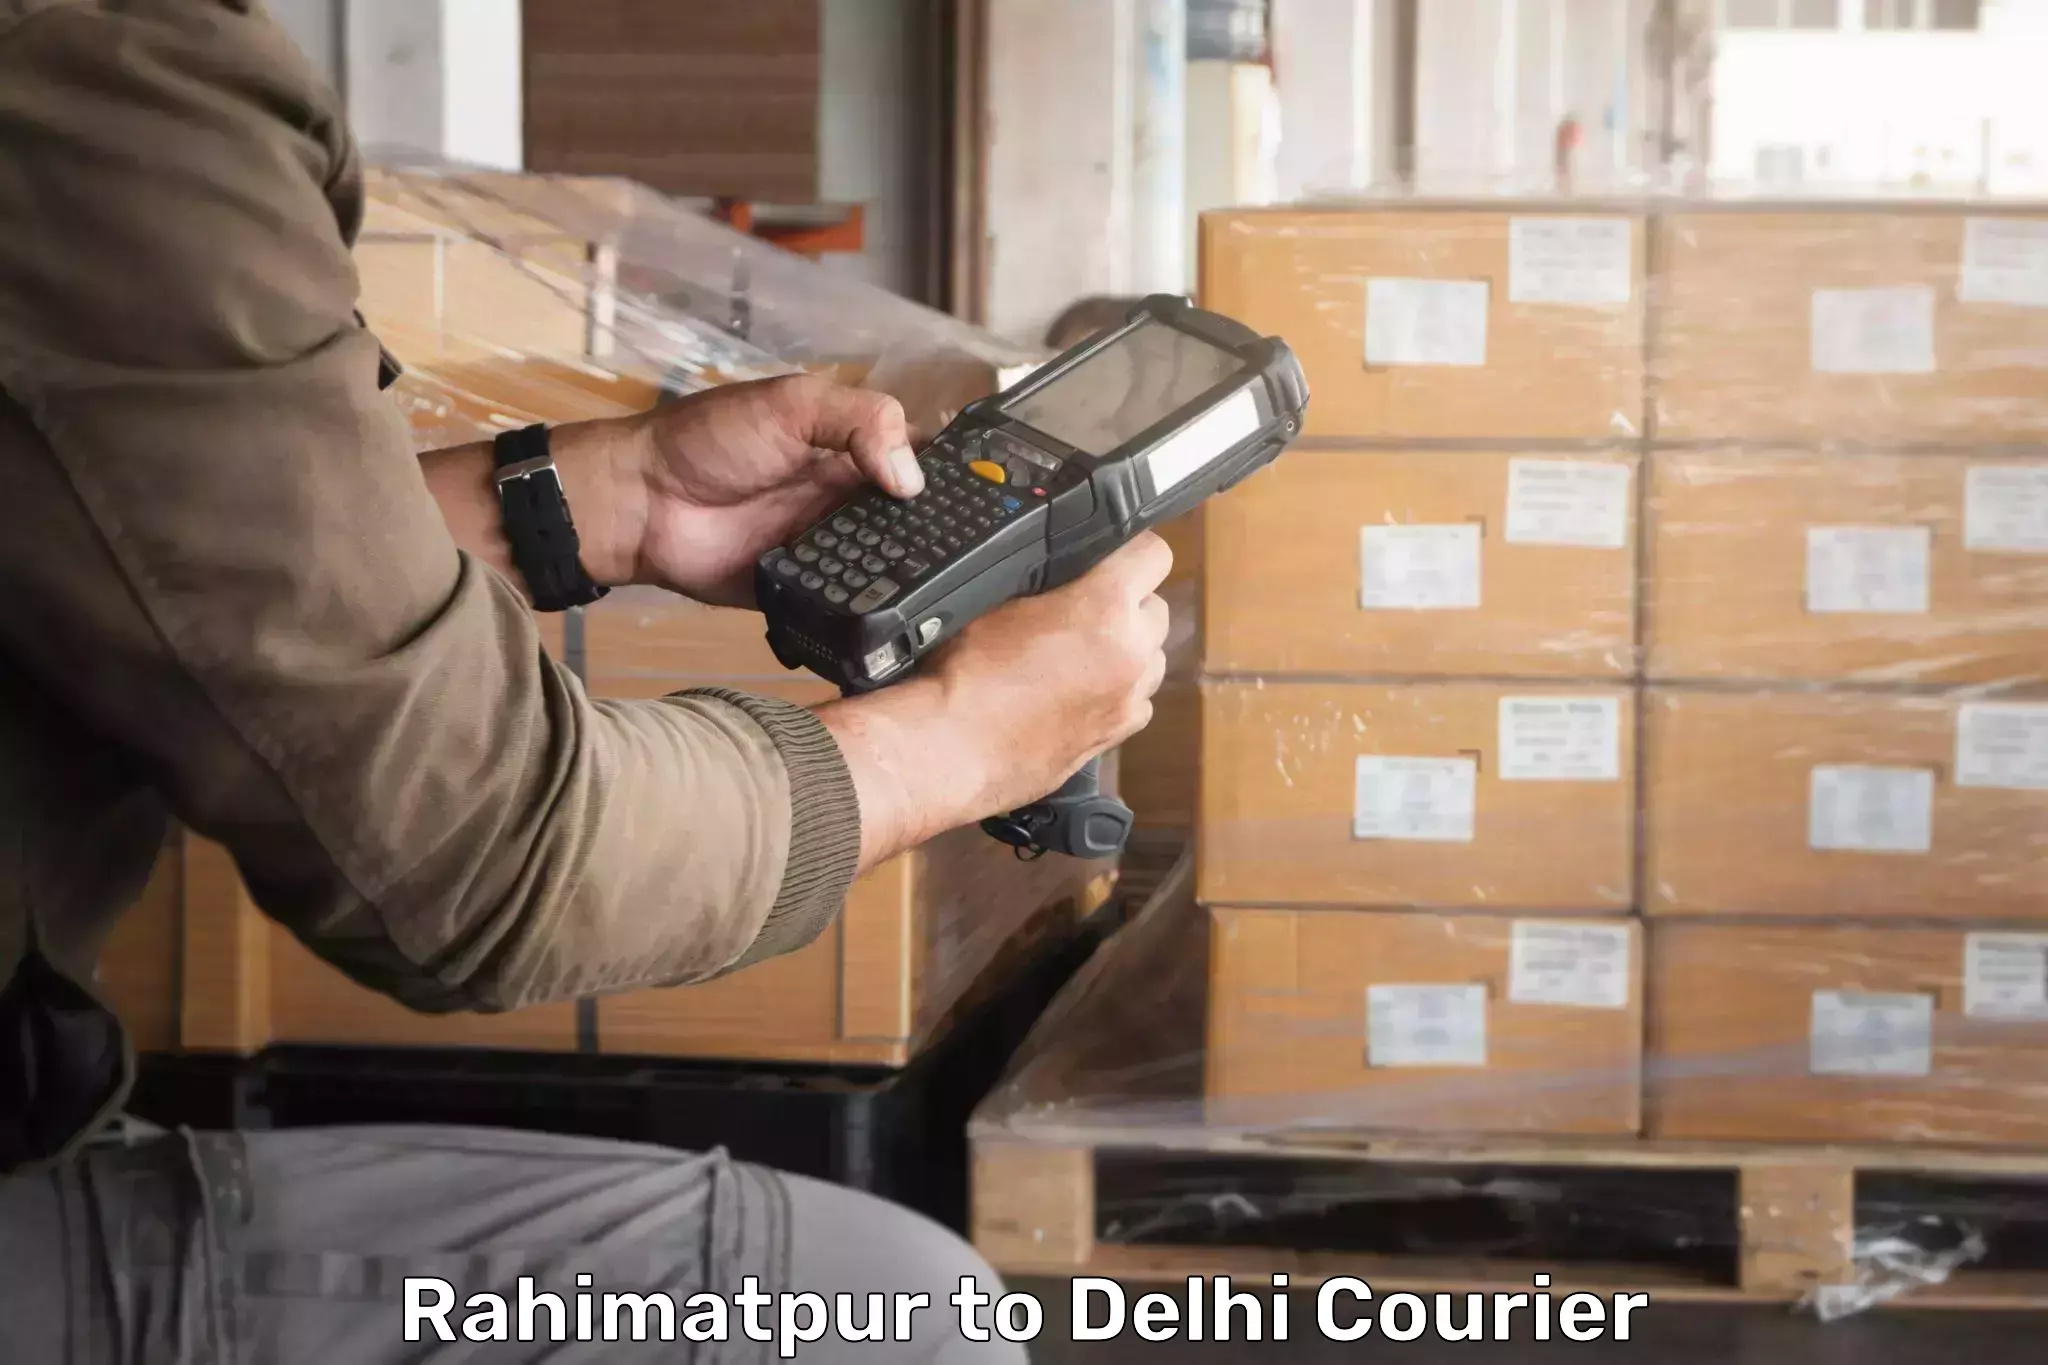 Efficient parcel delivery Rahimatpur to NCR